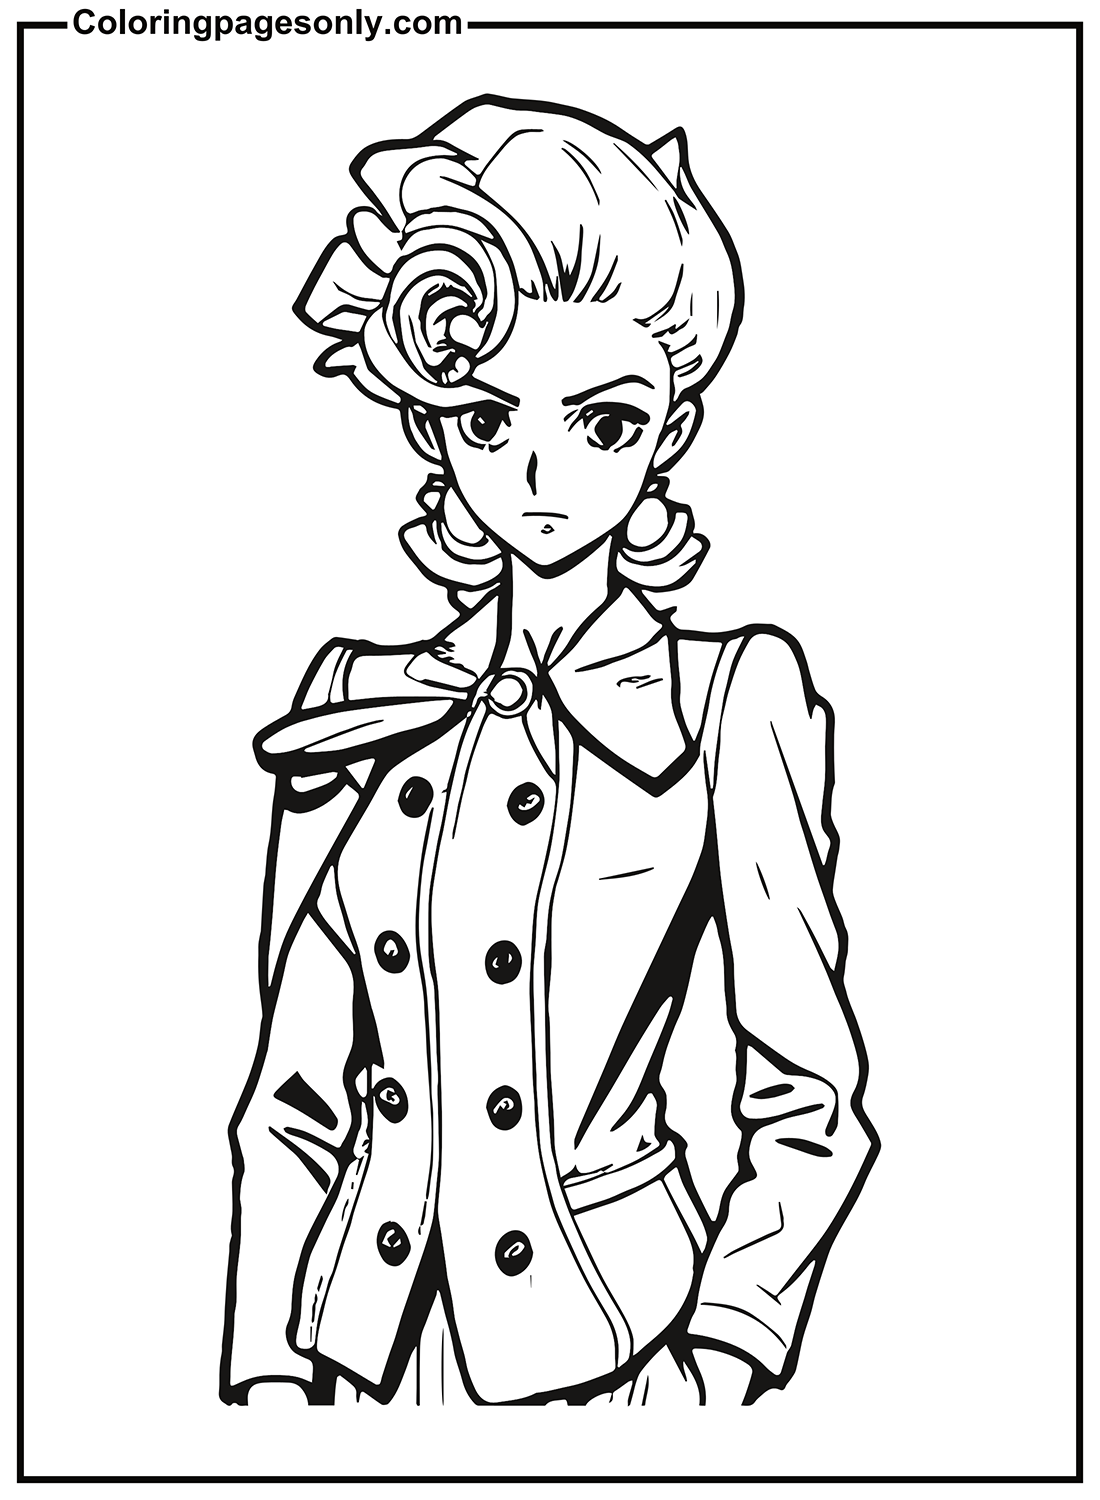 Character JoJo's Bizarre Adventure Coloring Pages